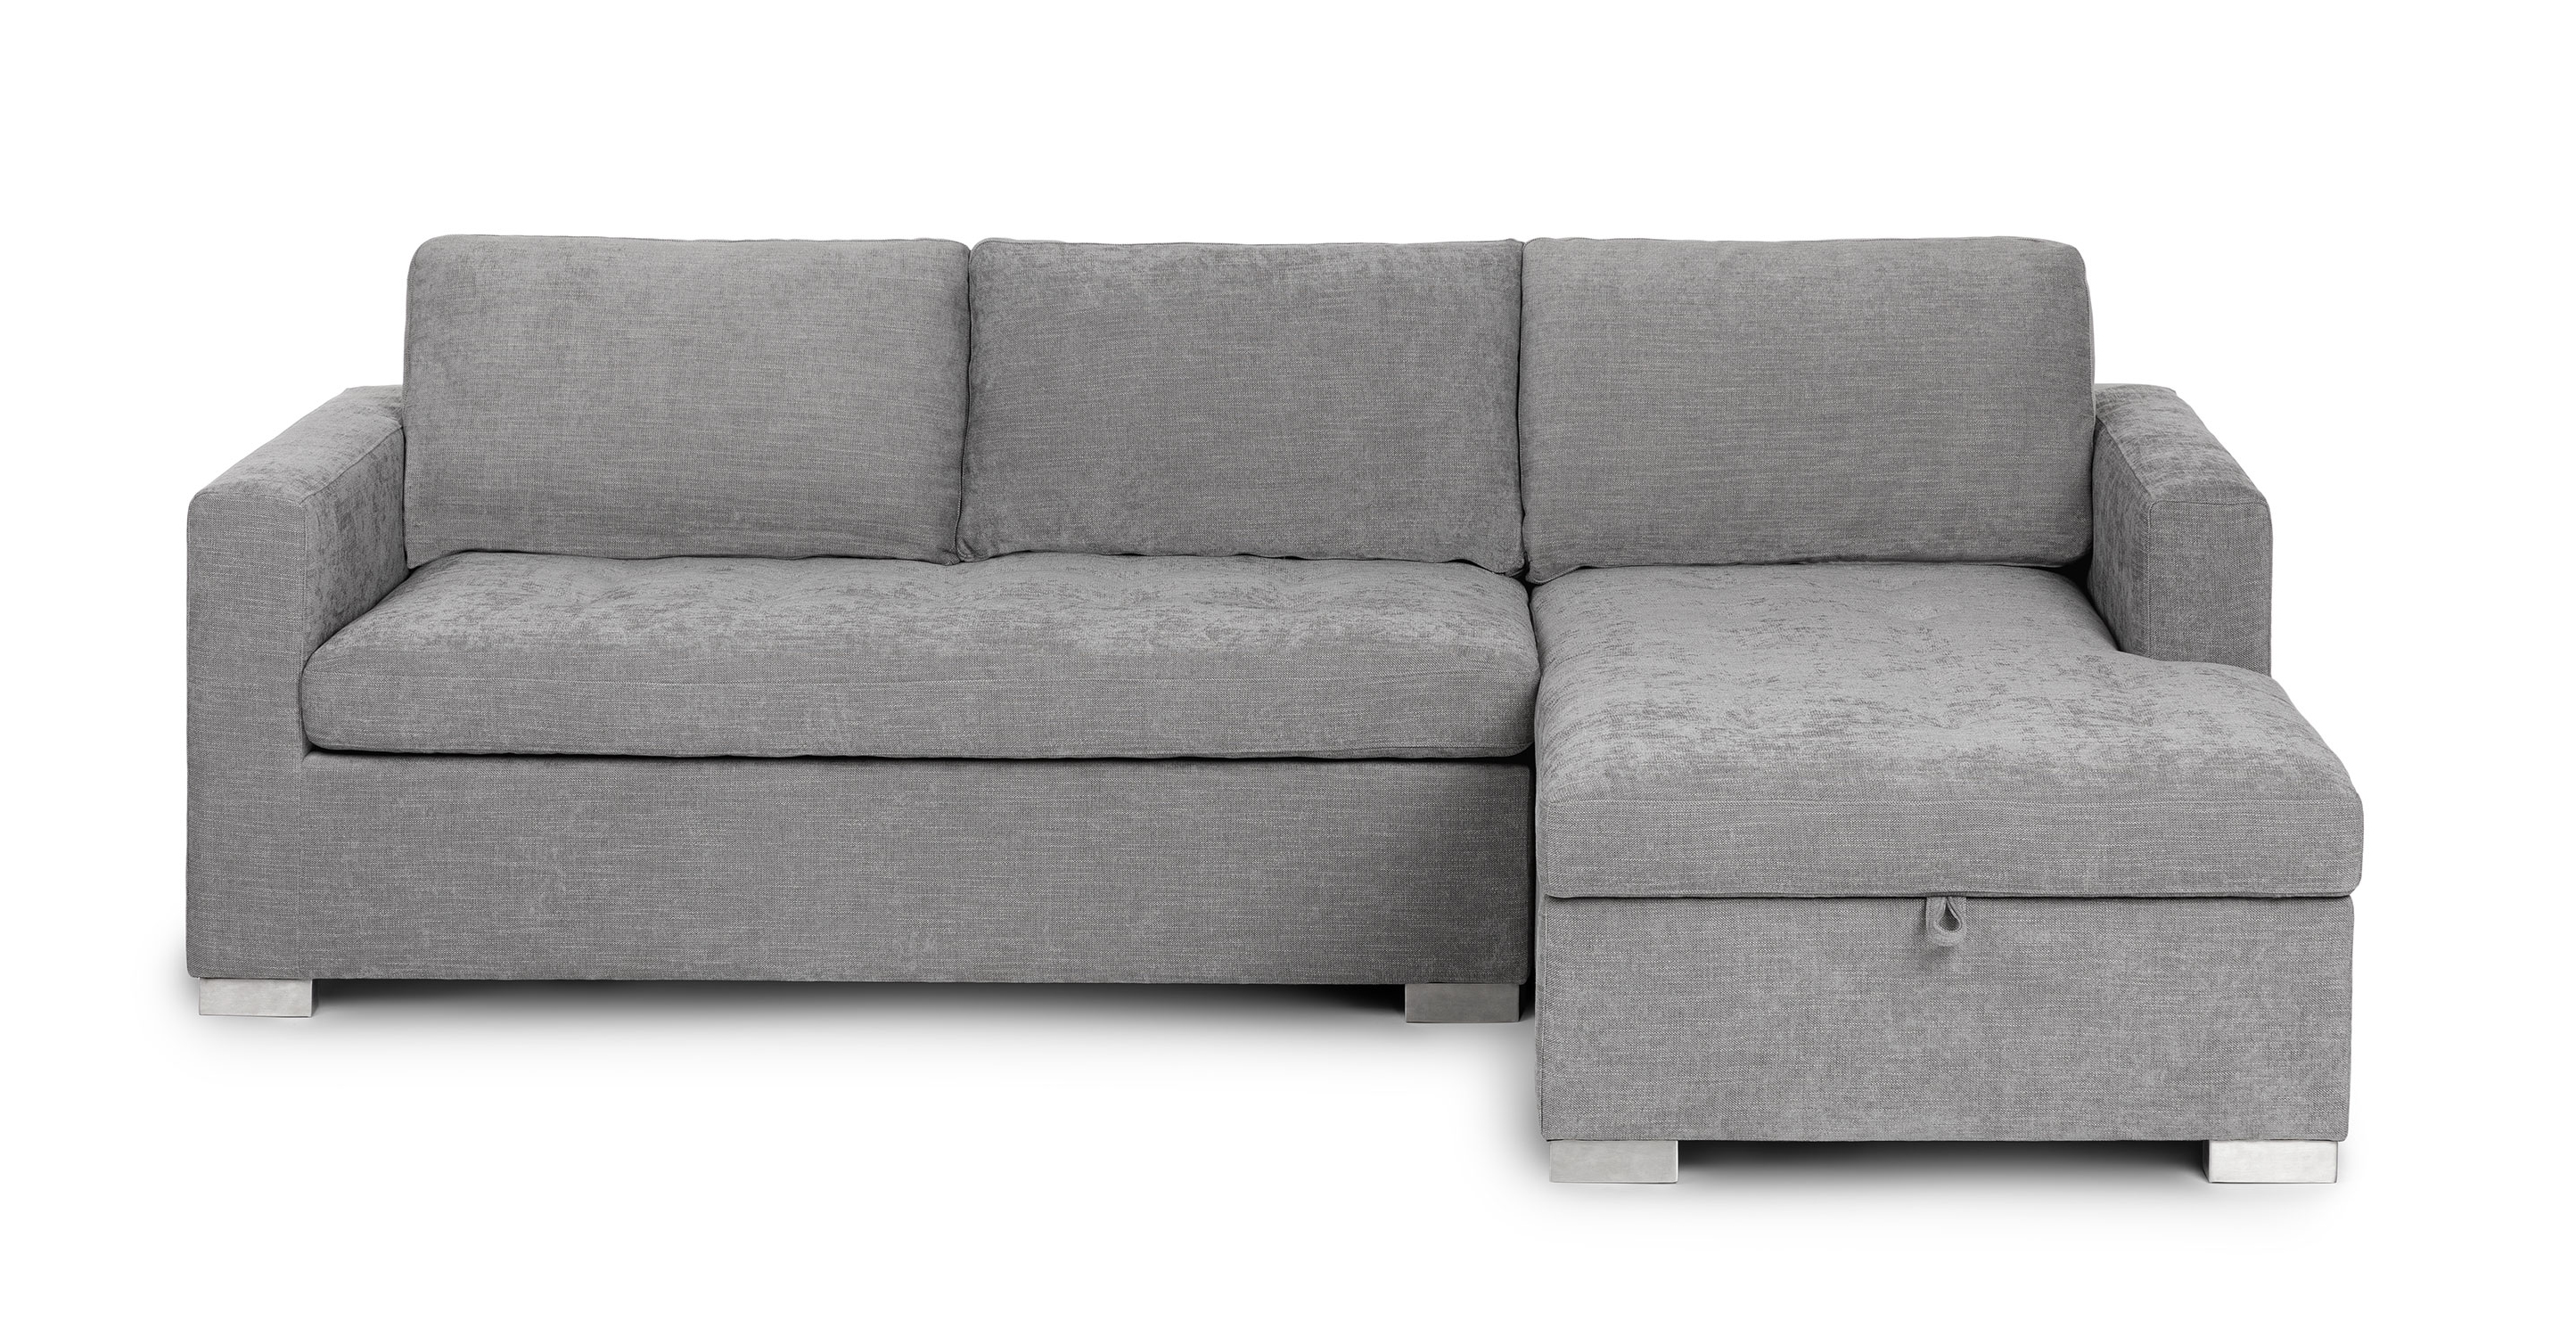 Details about   Couch Bed Sofa Sectional Living Room Sleeper Futon Furniture Loveseat Pad,Full 